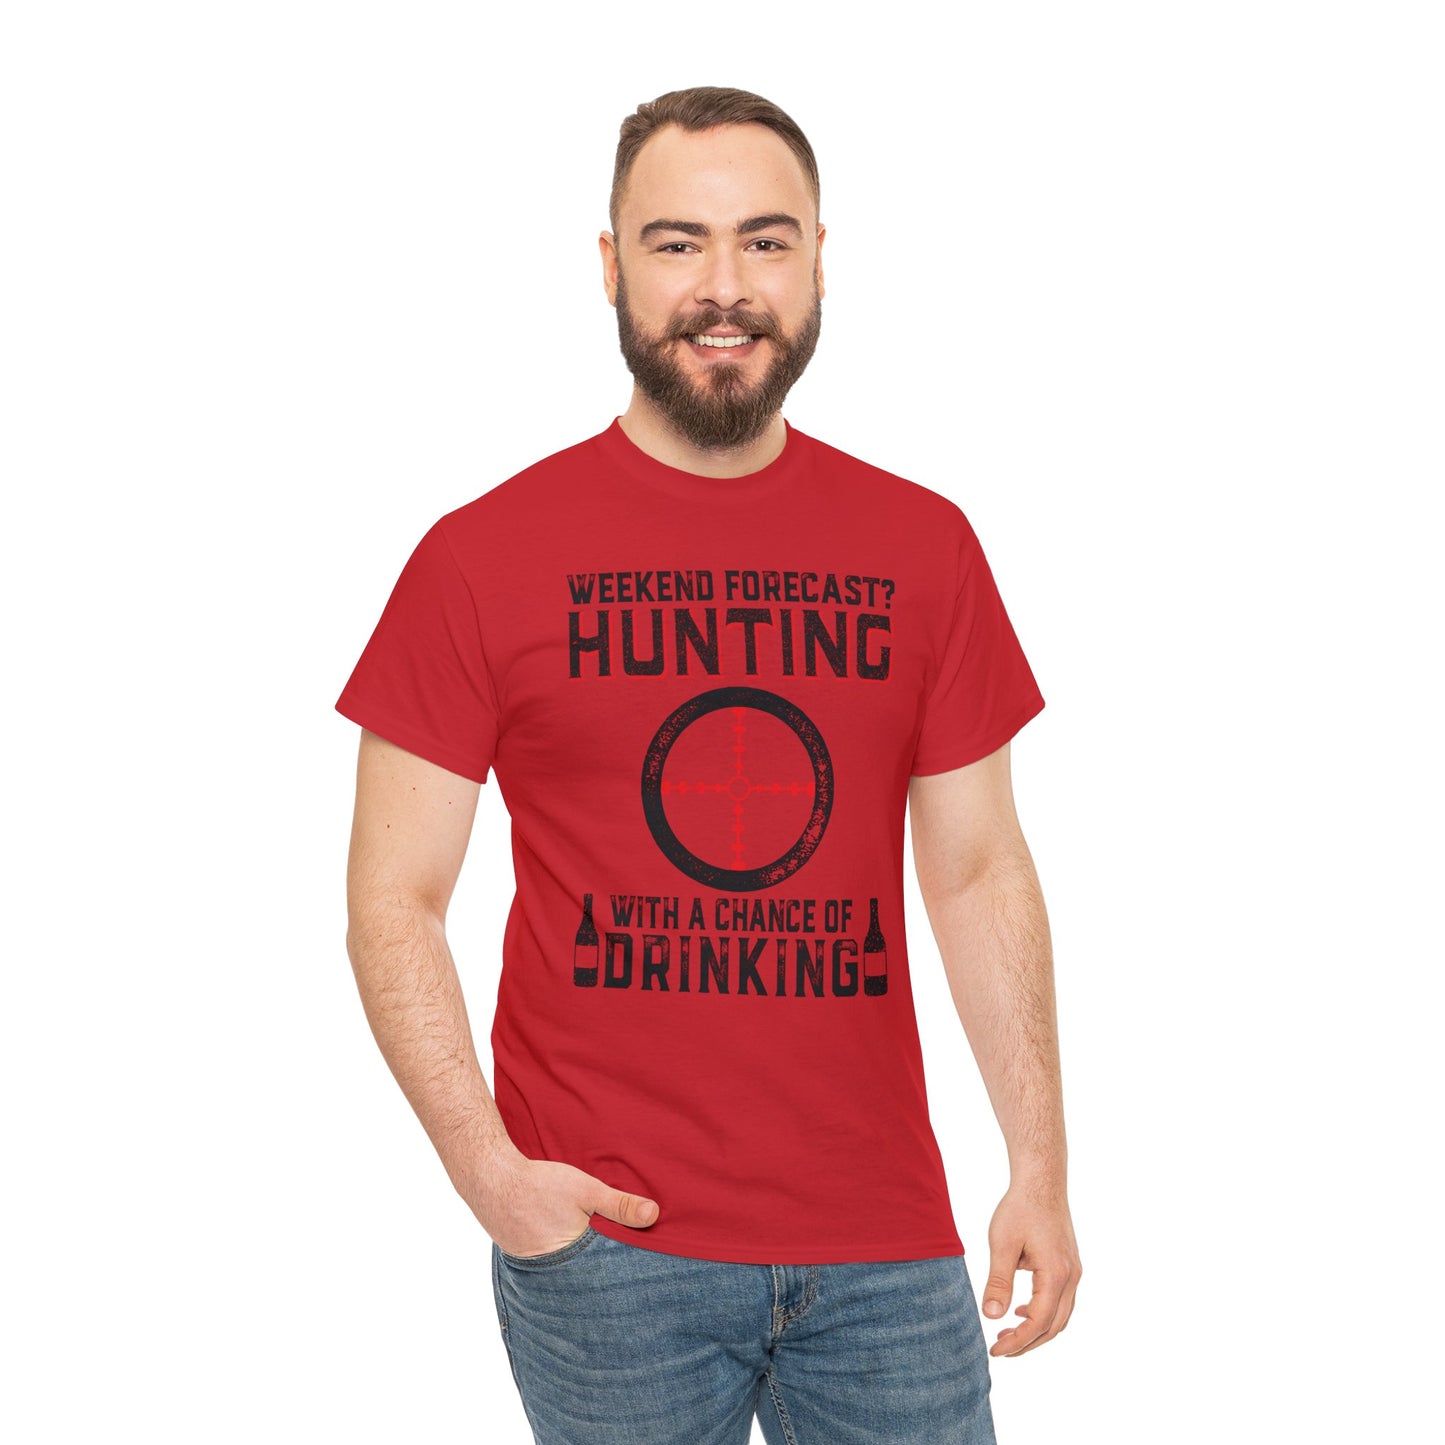 Weekend Focus Hunting T-shirts with a Splash of Fun!